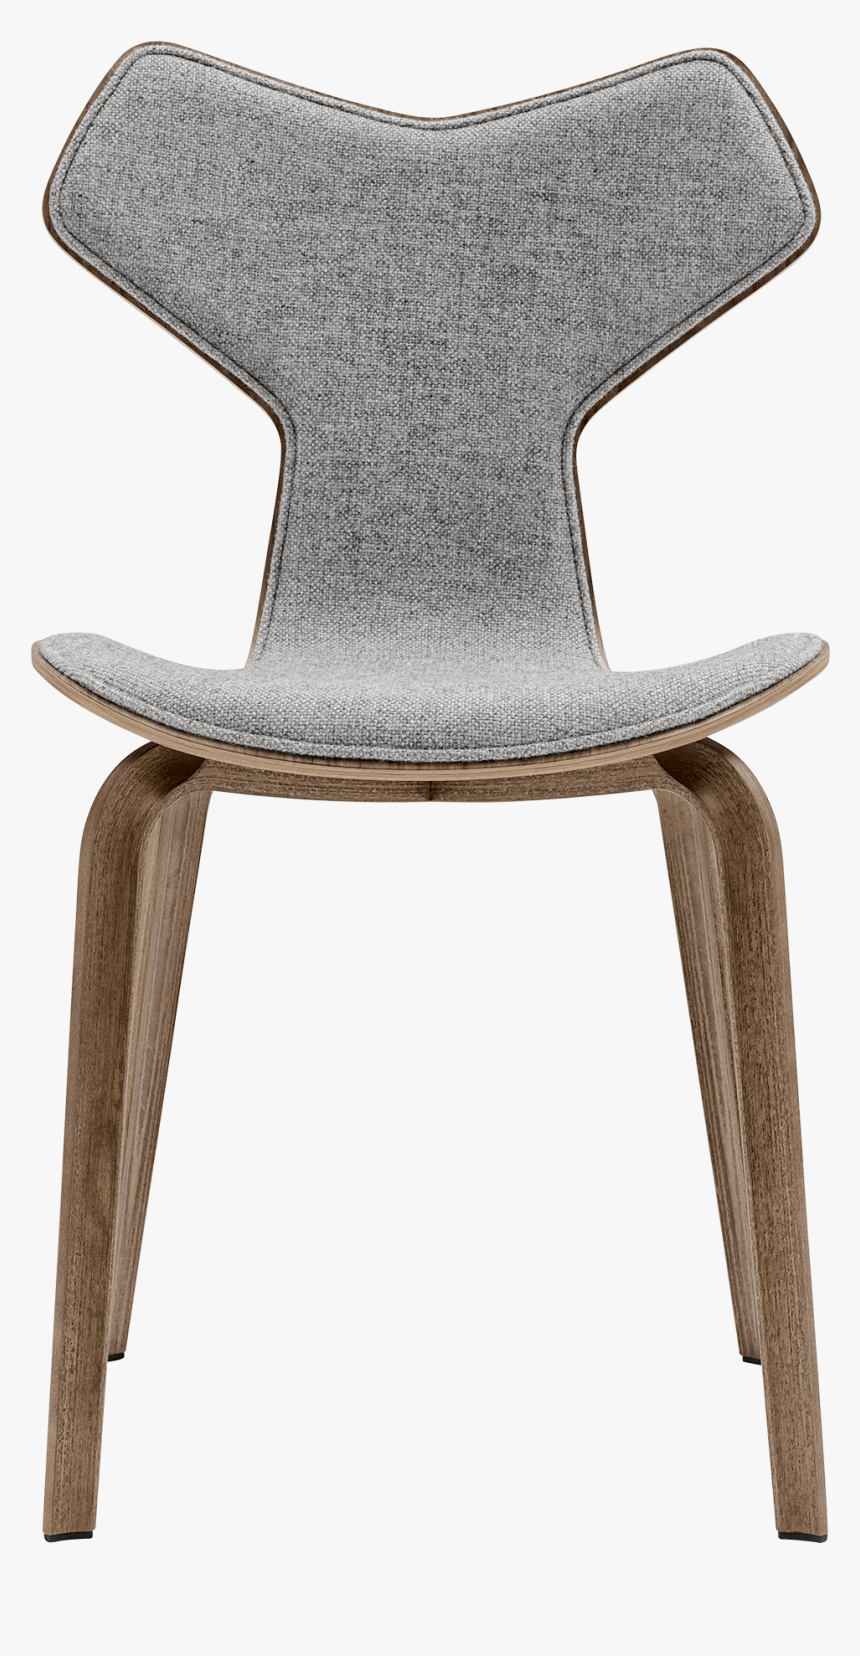 Grand Prix Chair Arne Jacobsen Front Upholstered Hallingdal - Arne Jacobsen Grand Prix, HD Png Download, Free Download